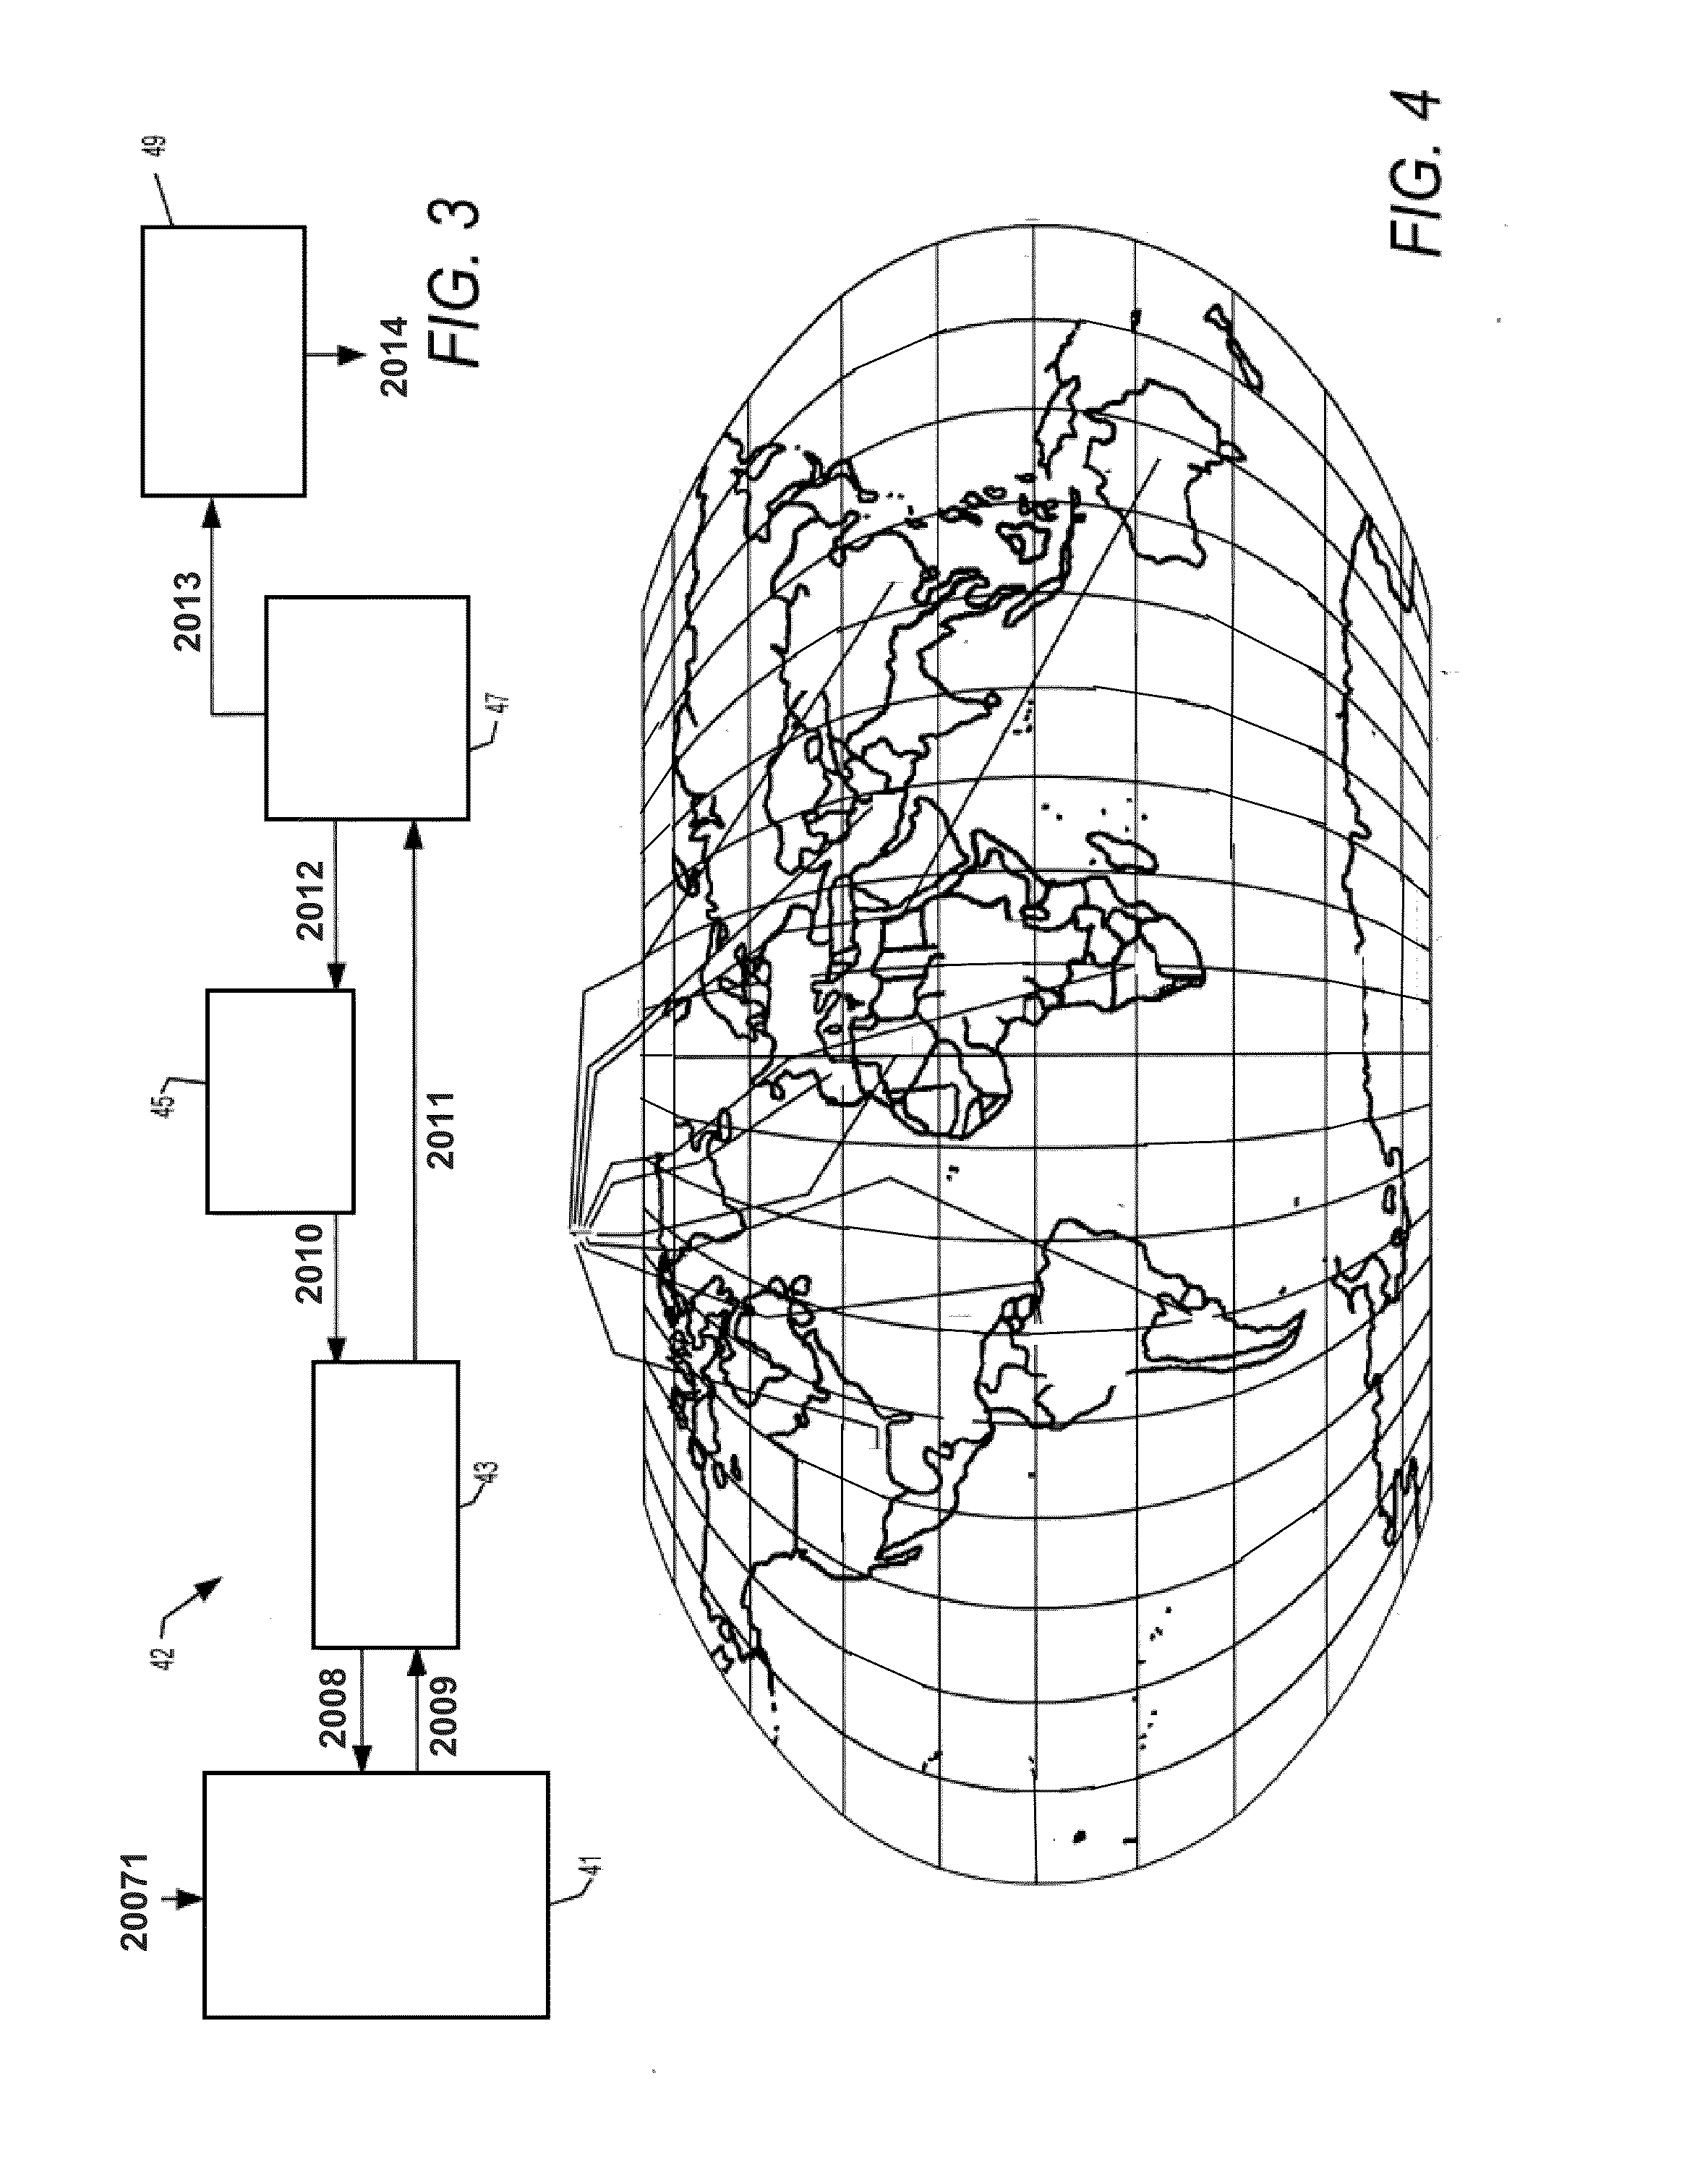 System and method for carbon dioxide capture and sequestration